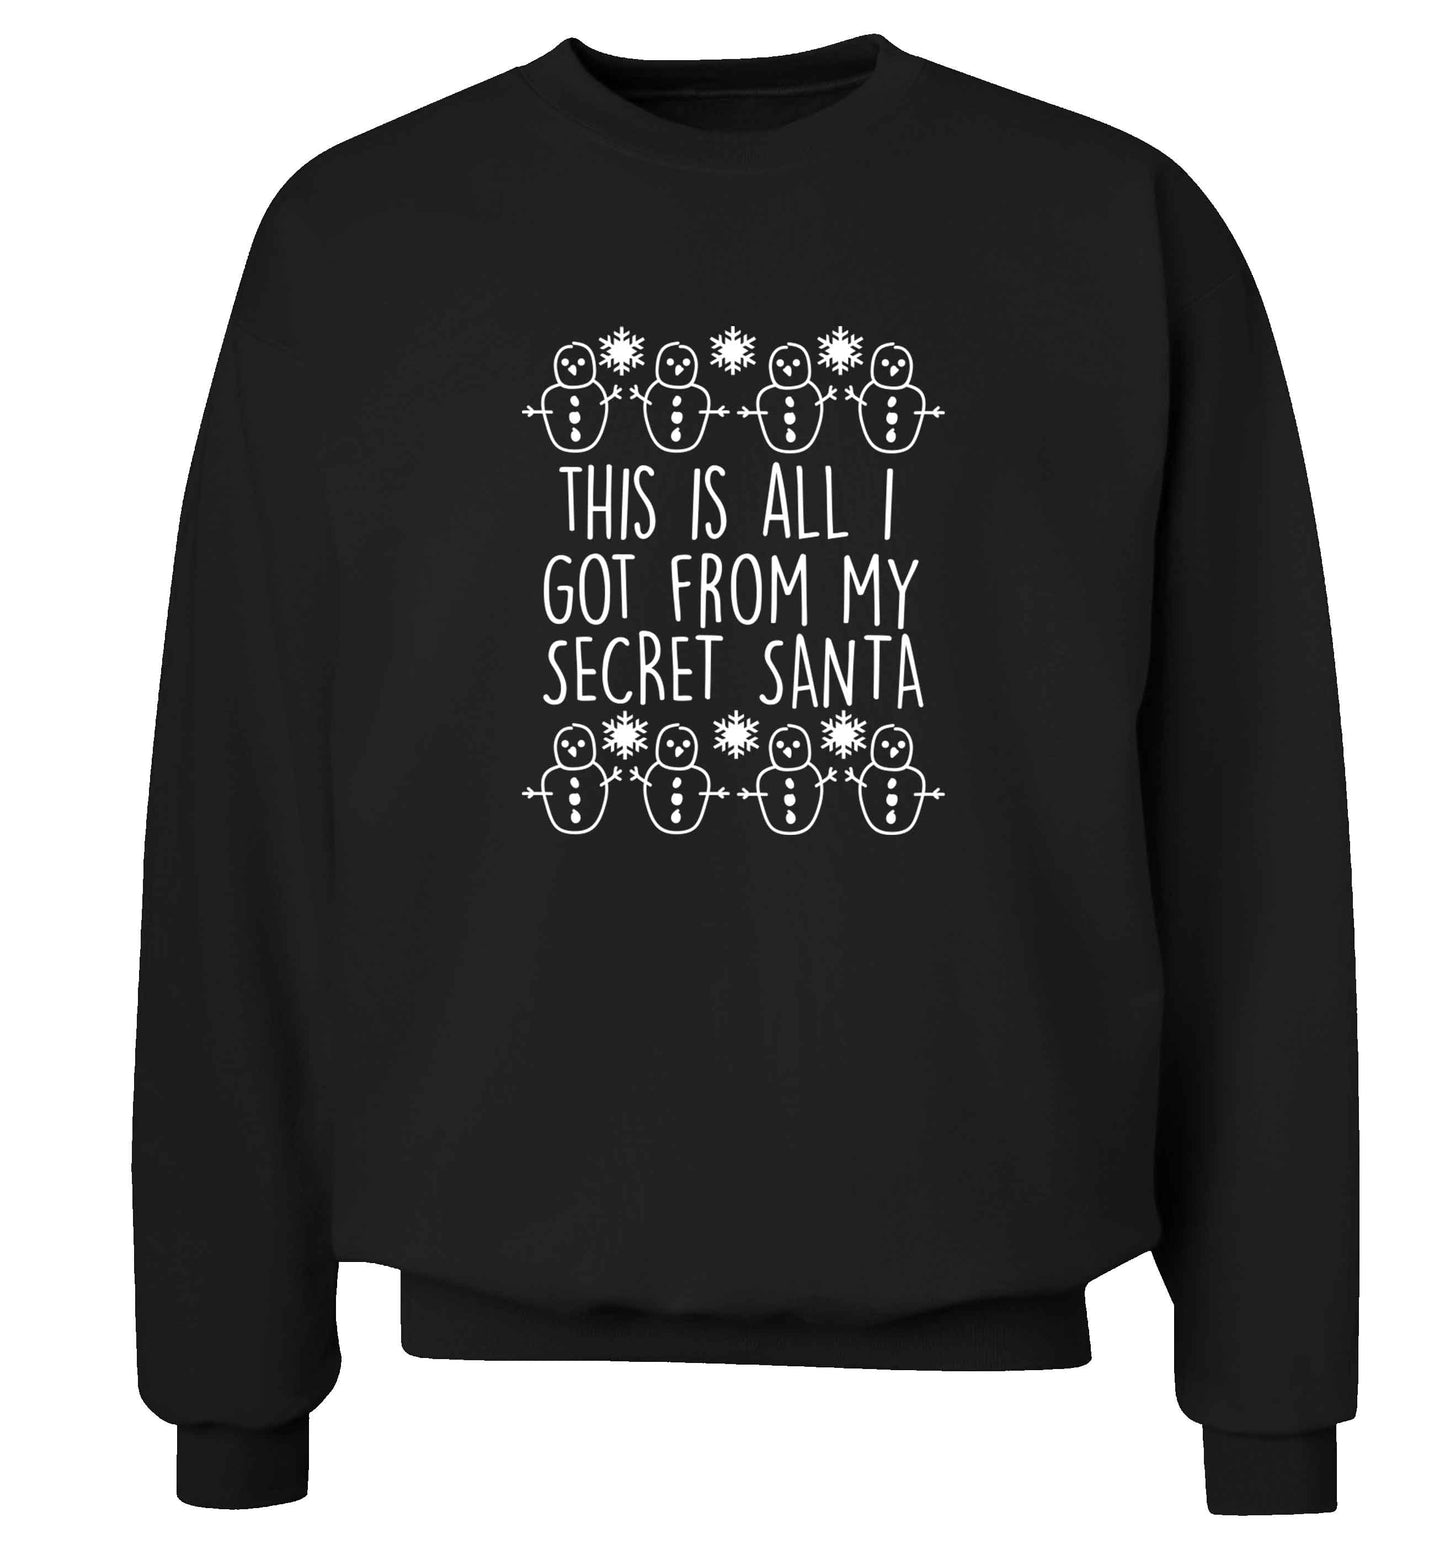 This is all I got from my secret Santa adult's unisex black sweater 2XL